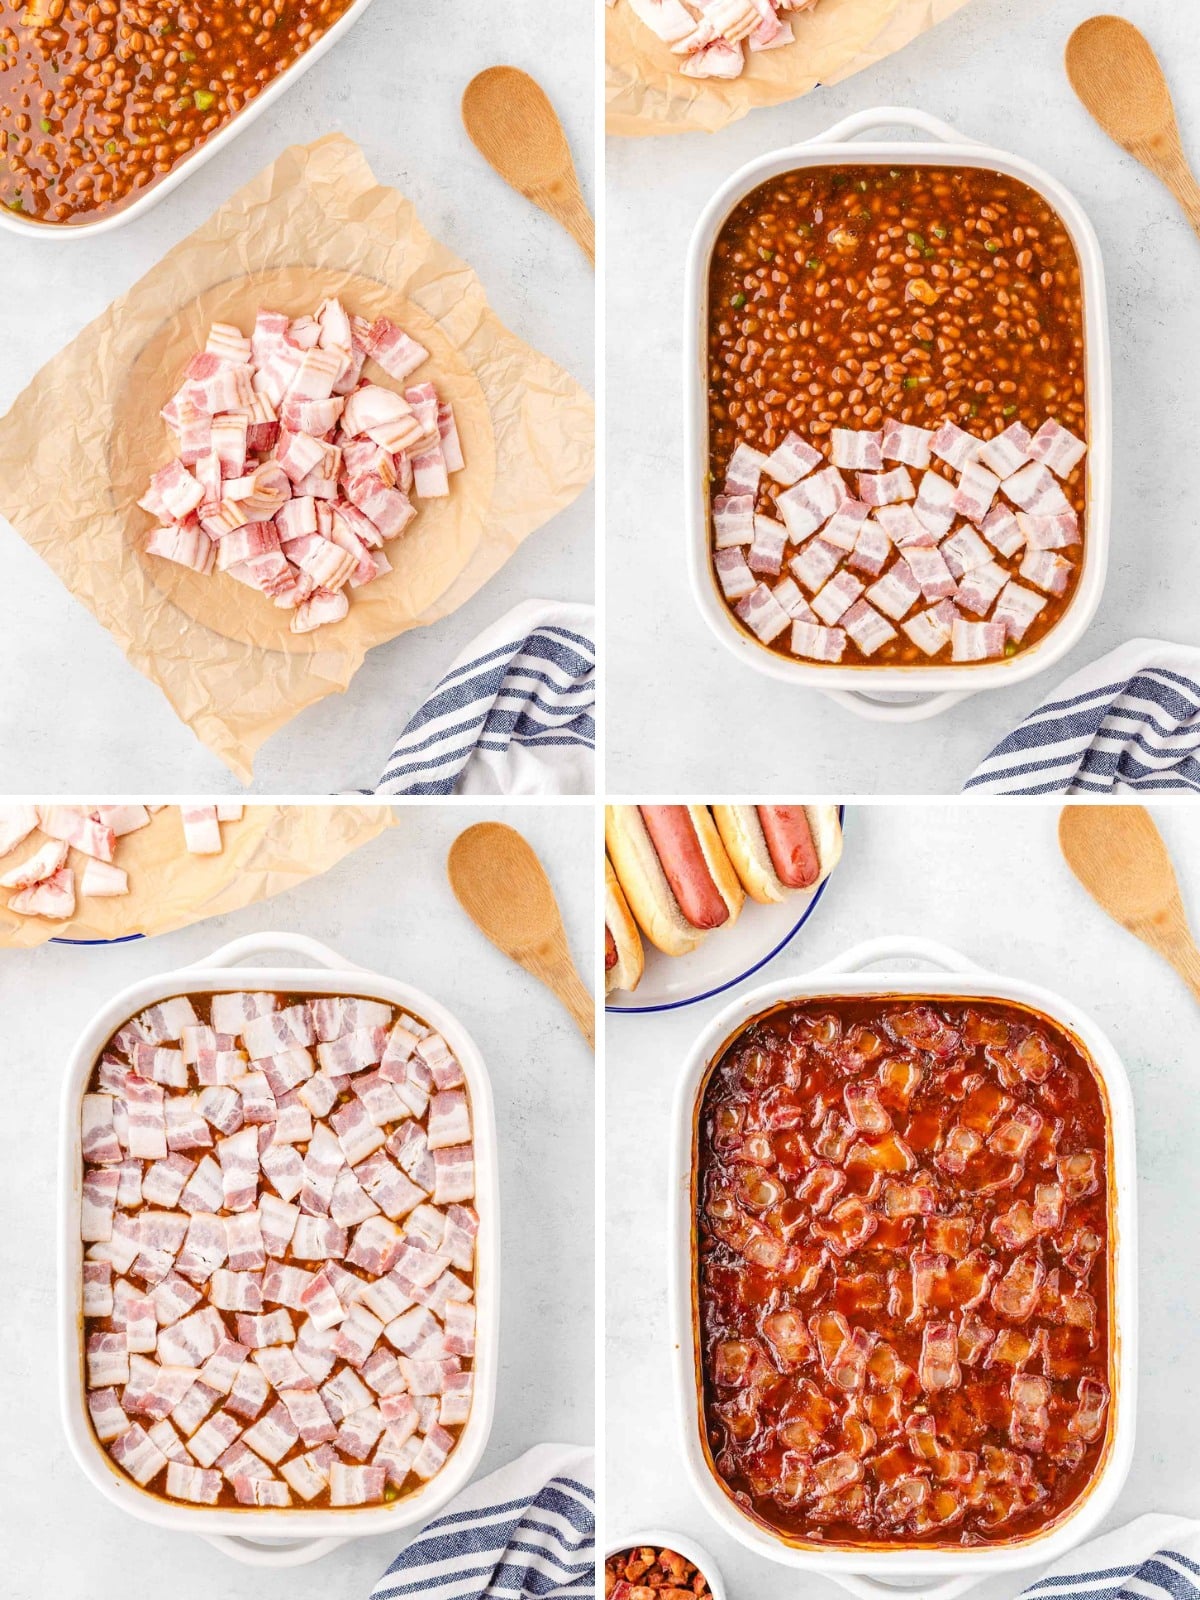 A collage image showing cutting bacon into bite-sized pieces, and topping beans in a 9 X 13 dish, then the baked beans after being cooked.